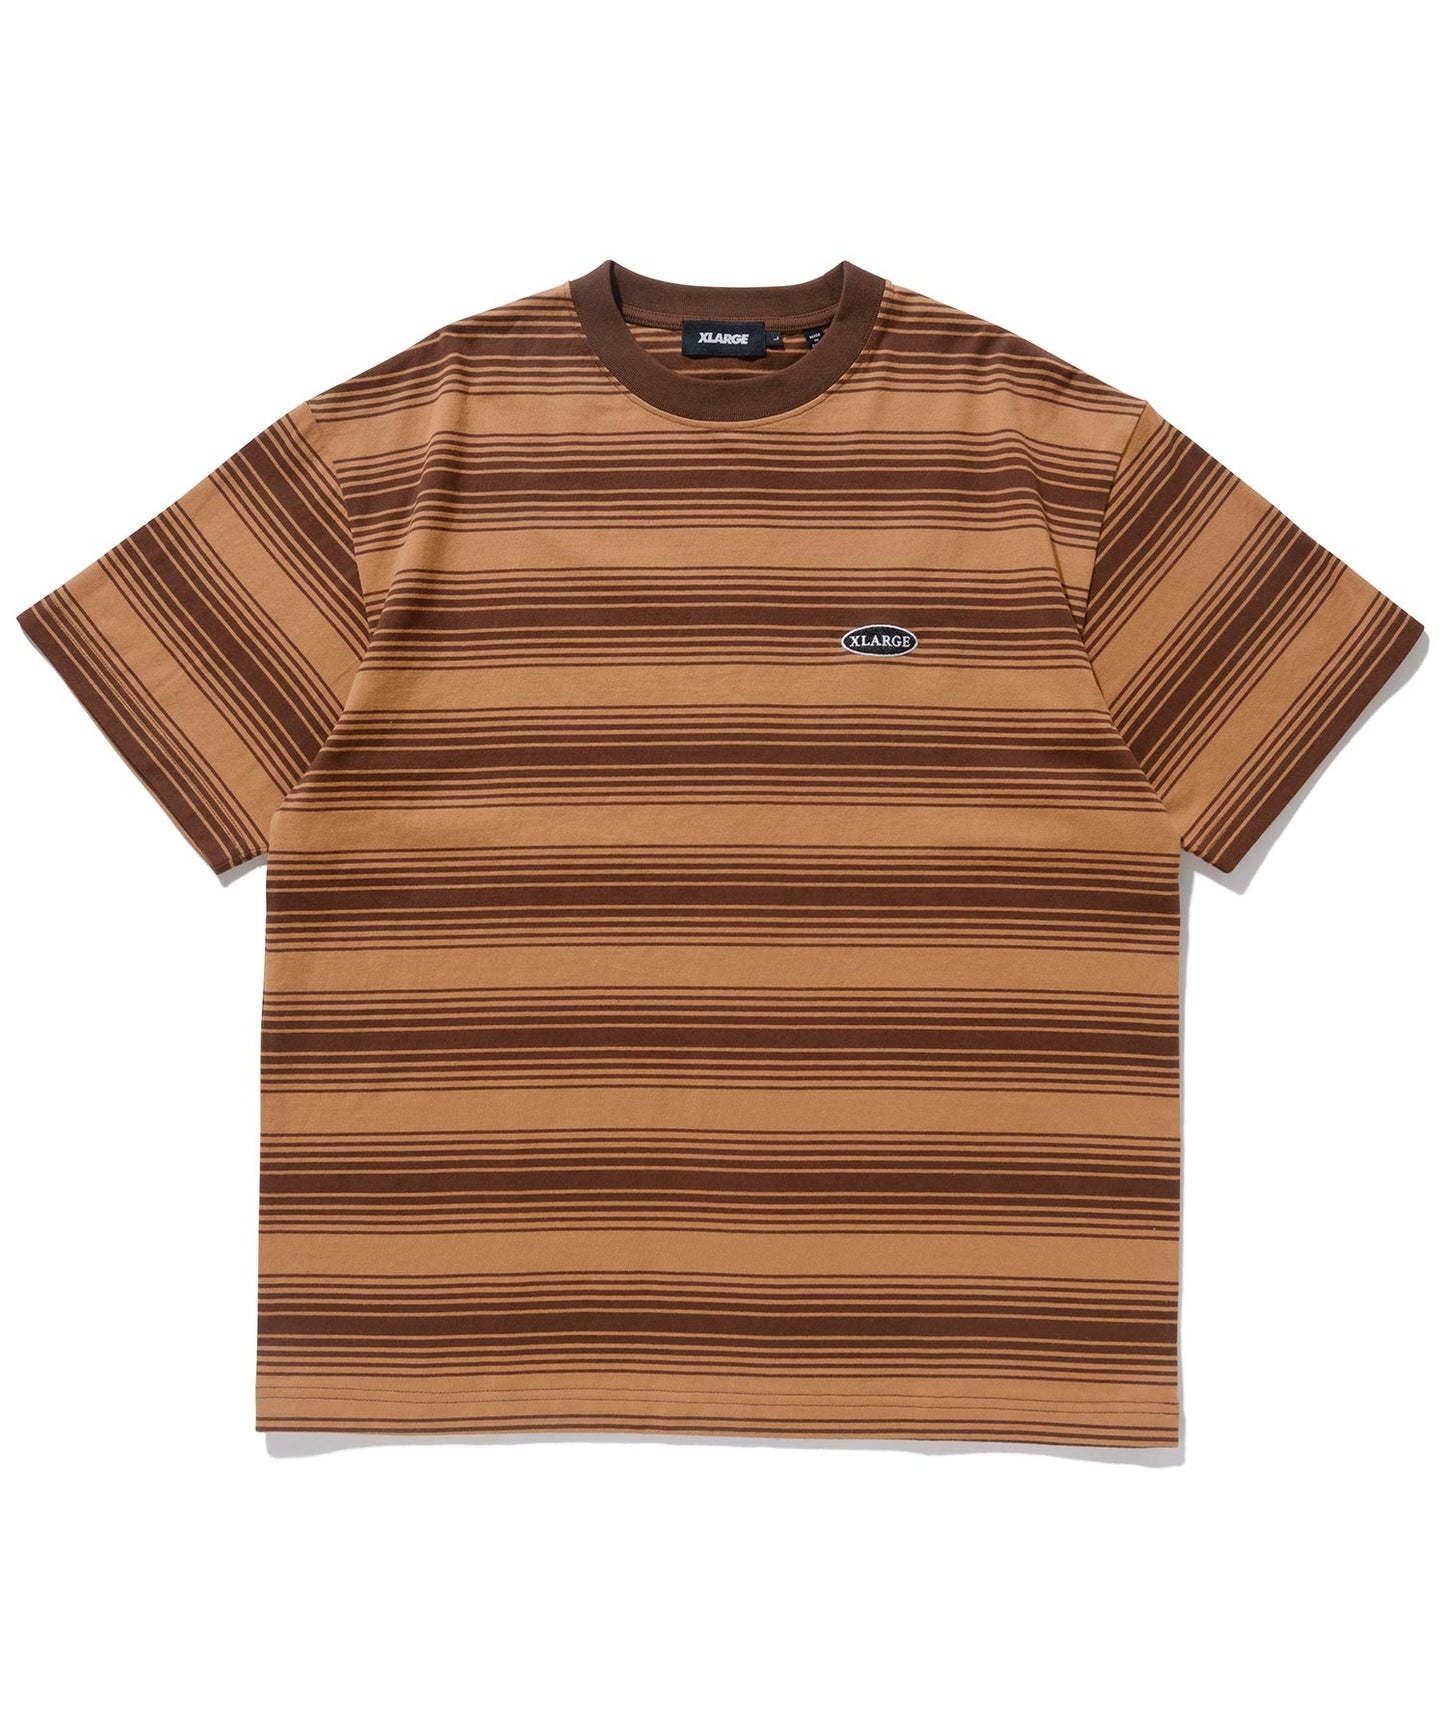 EMBROIDERED STRIPED S/S TEE